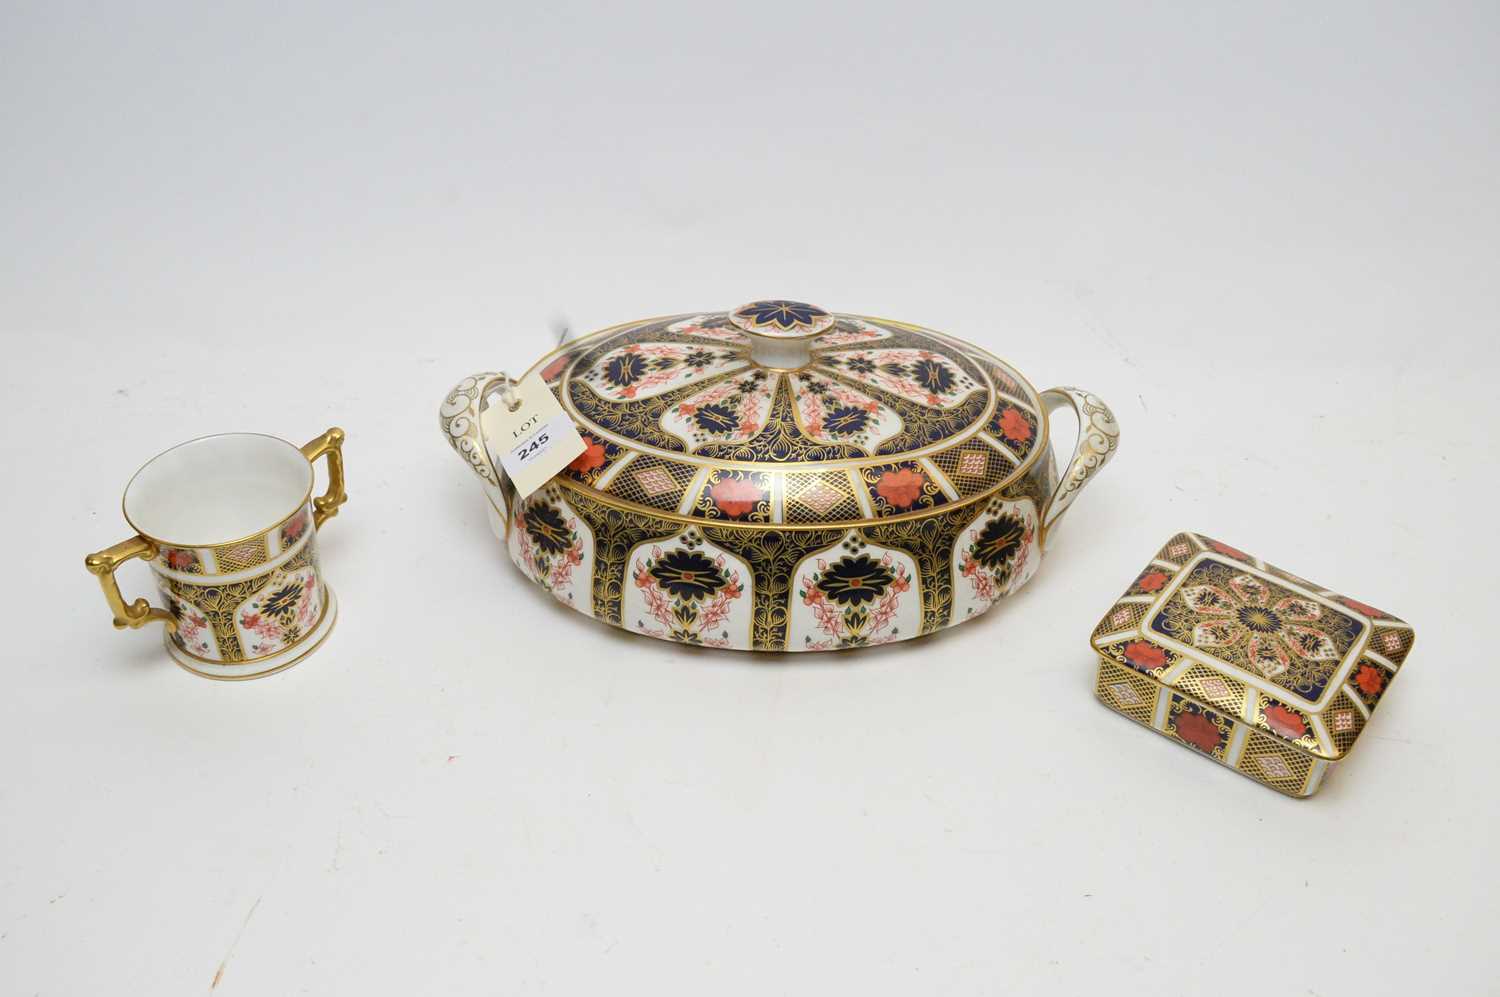 Lot 245 - Royal Crown Derby tureen and cover, two-handled cup; and similar jar and cover.